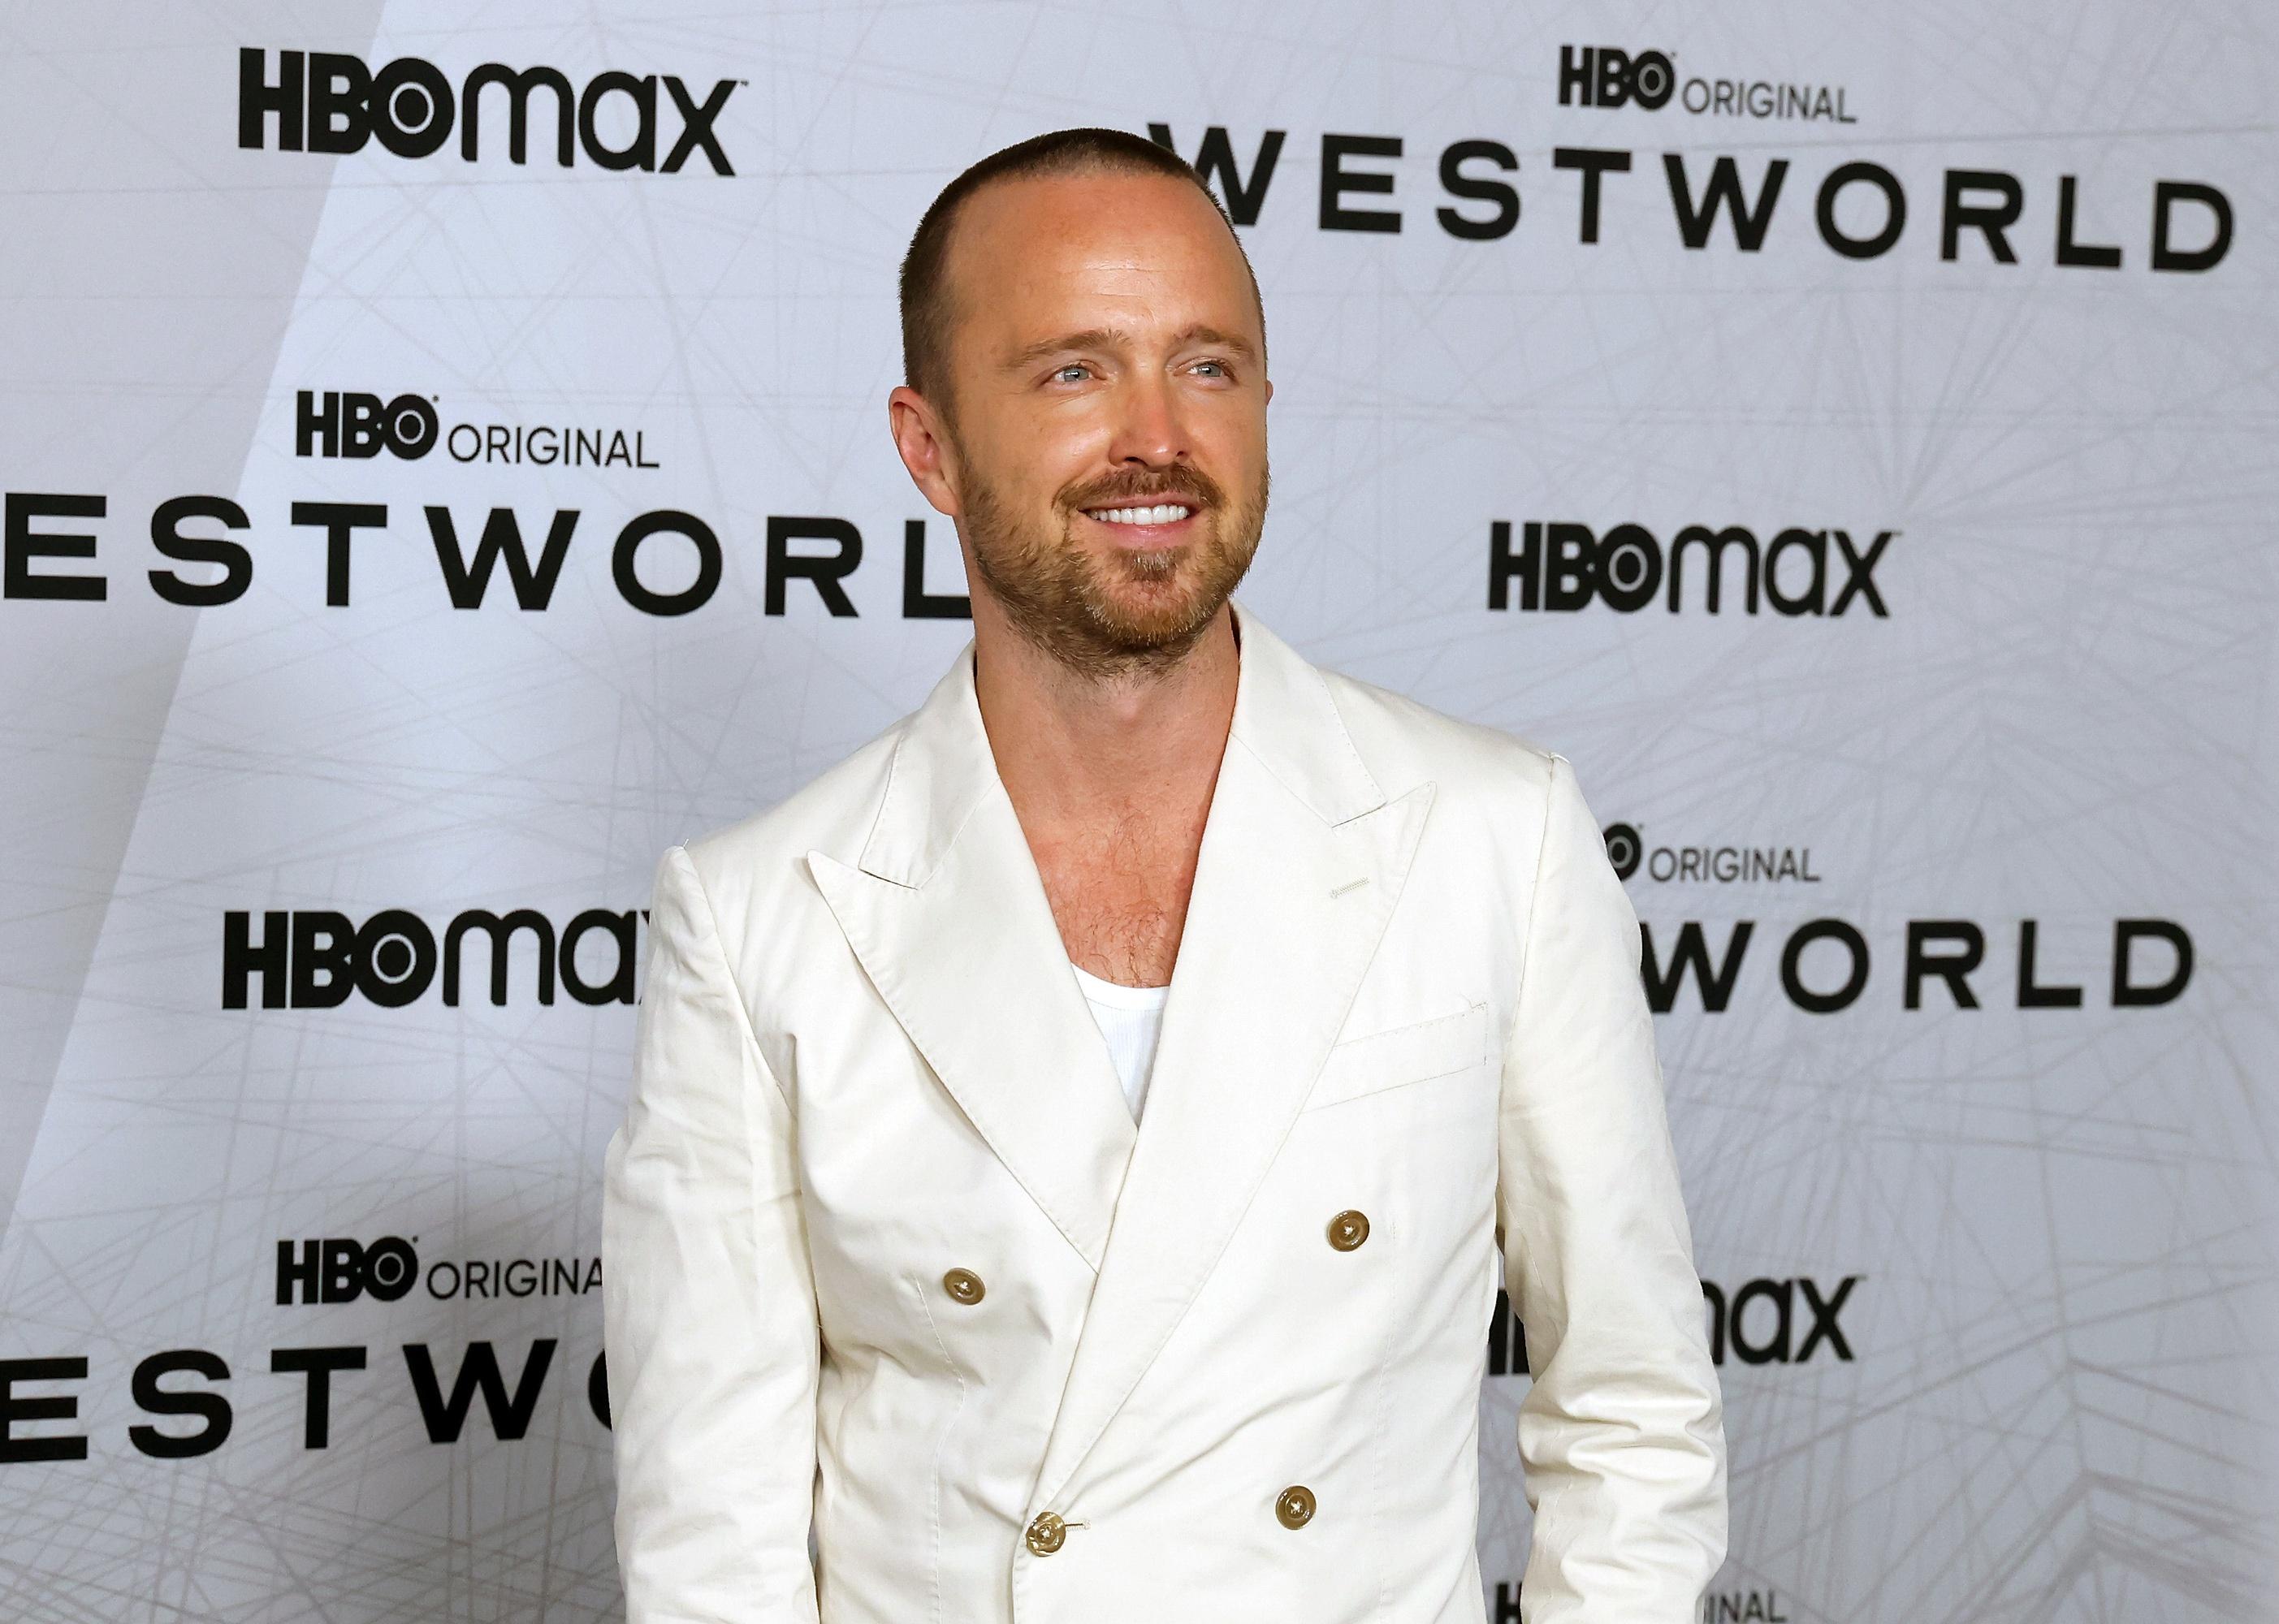 Aaron Paul in a white suit.